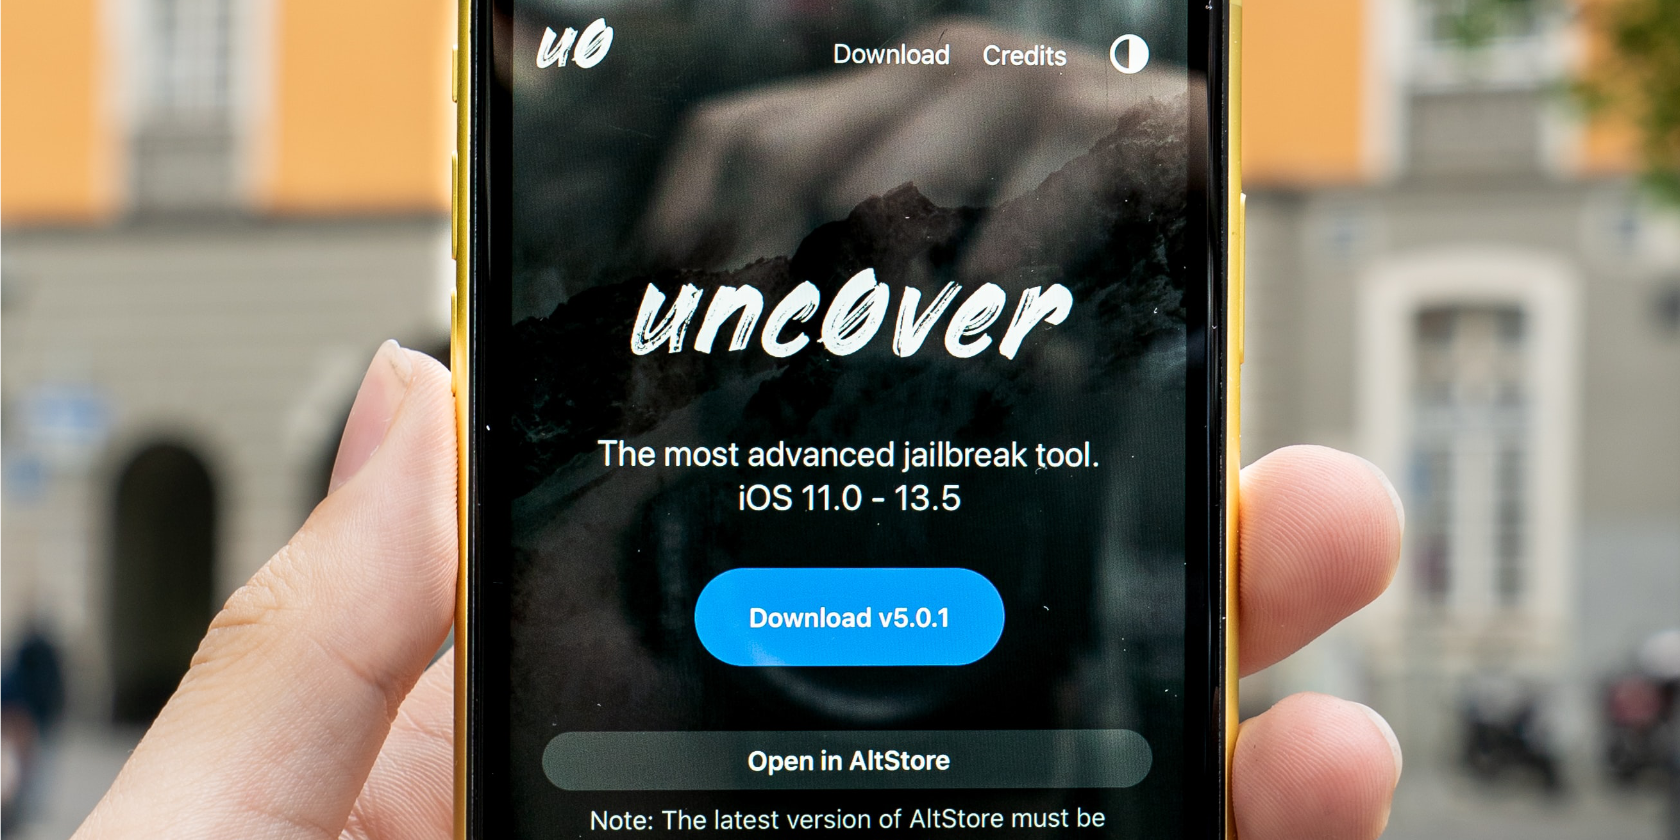 Is it safe to jailbreak your iPhone?